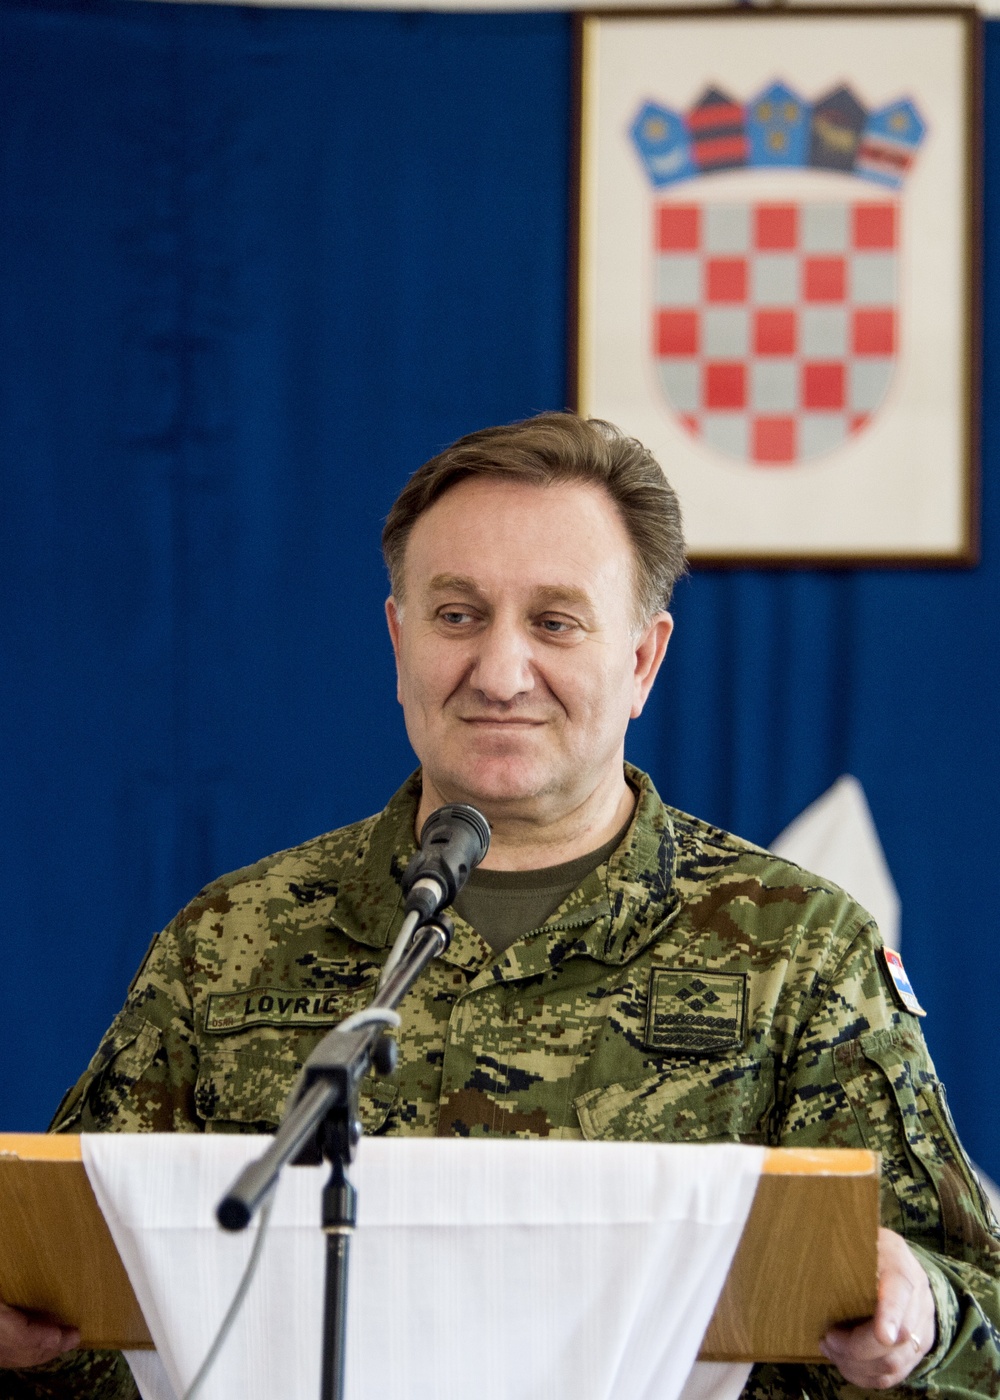 Chief defense of the Croatian forces, Gen. Drago Lovric